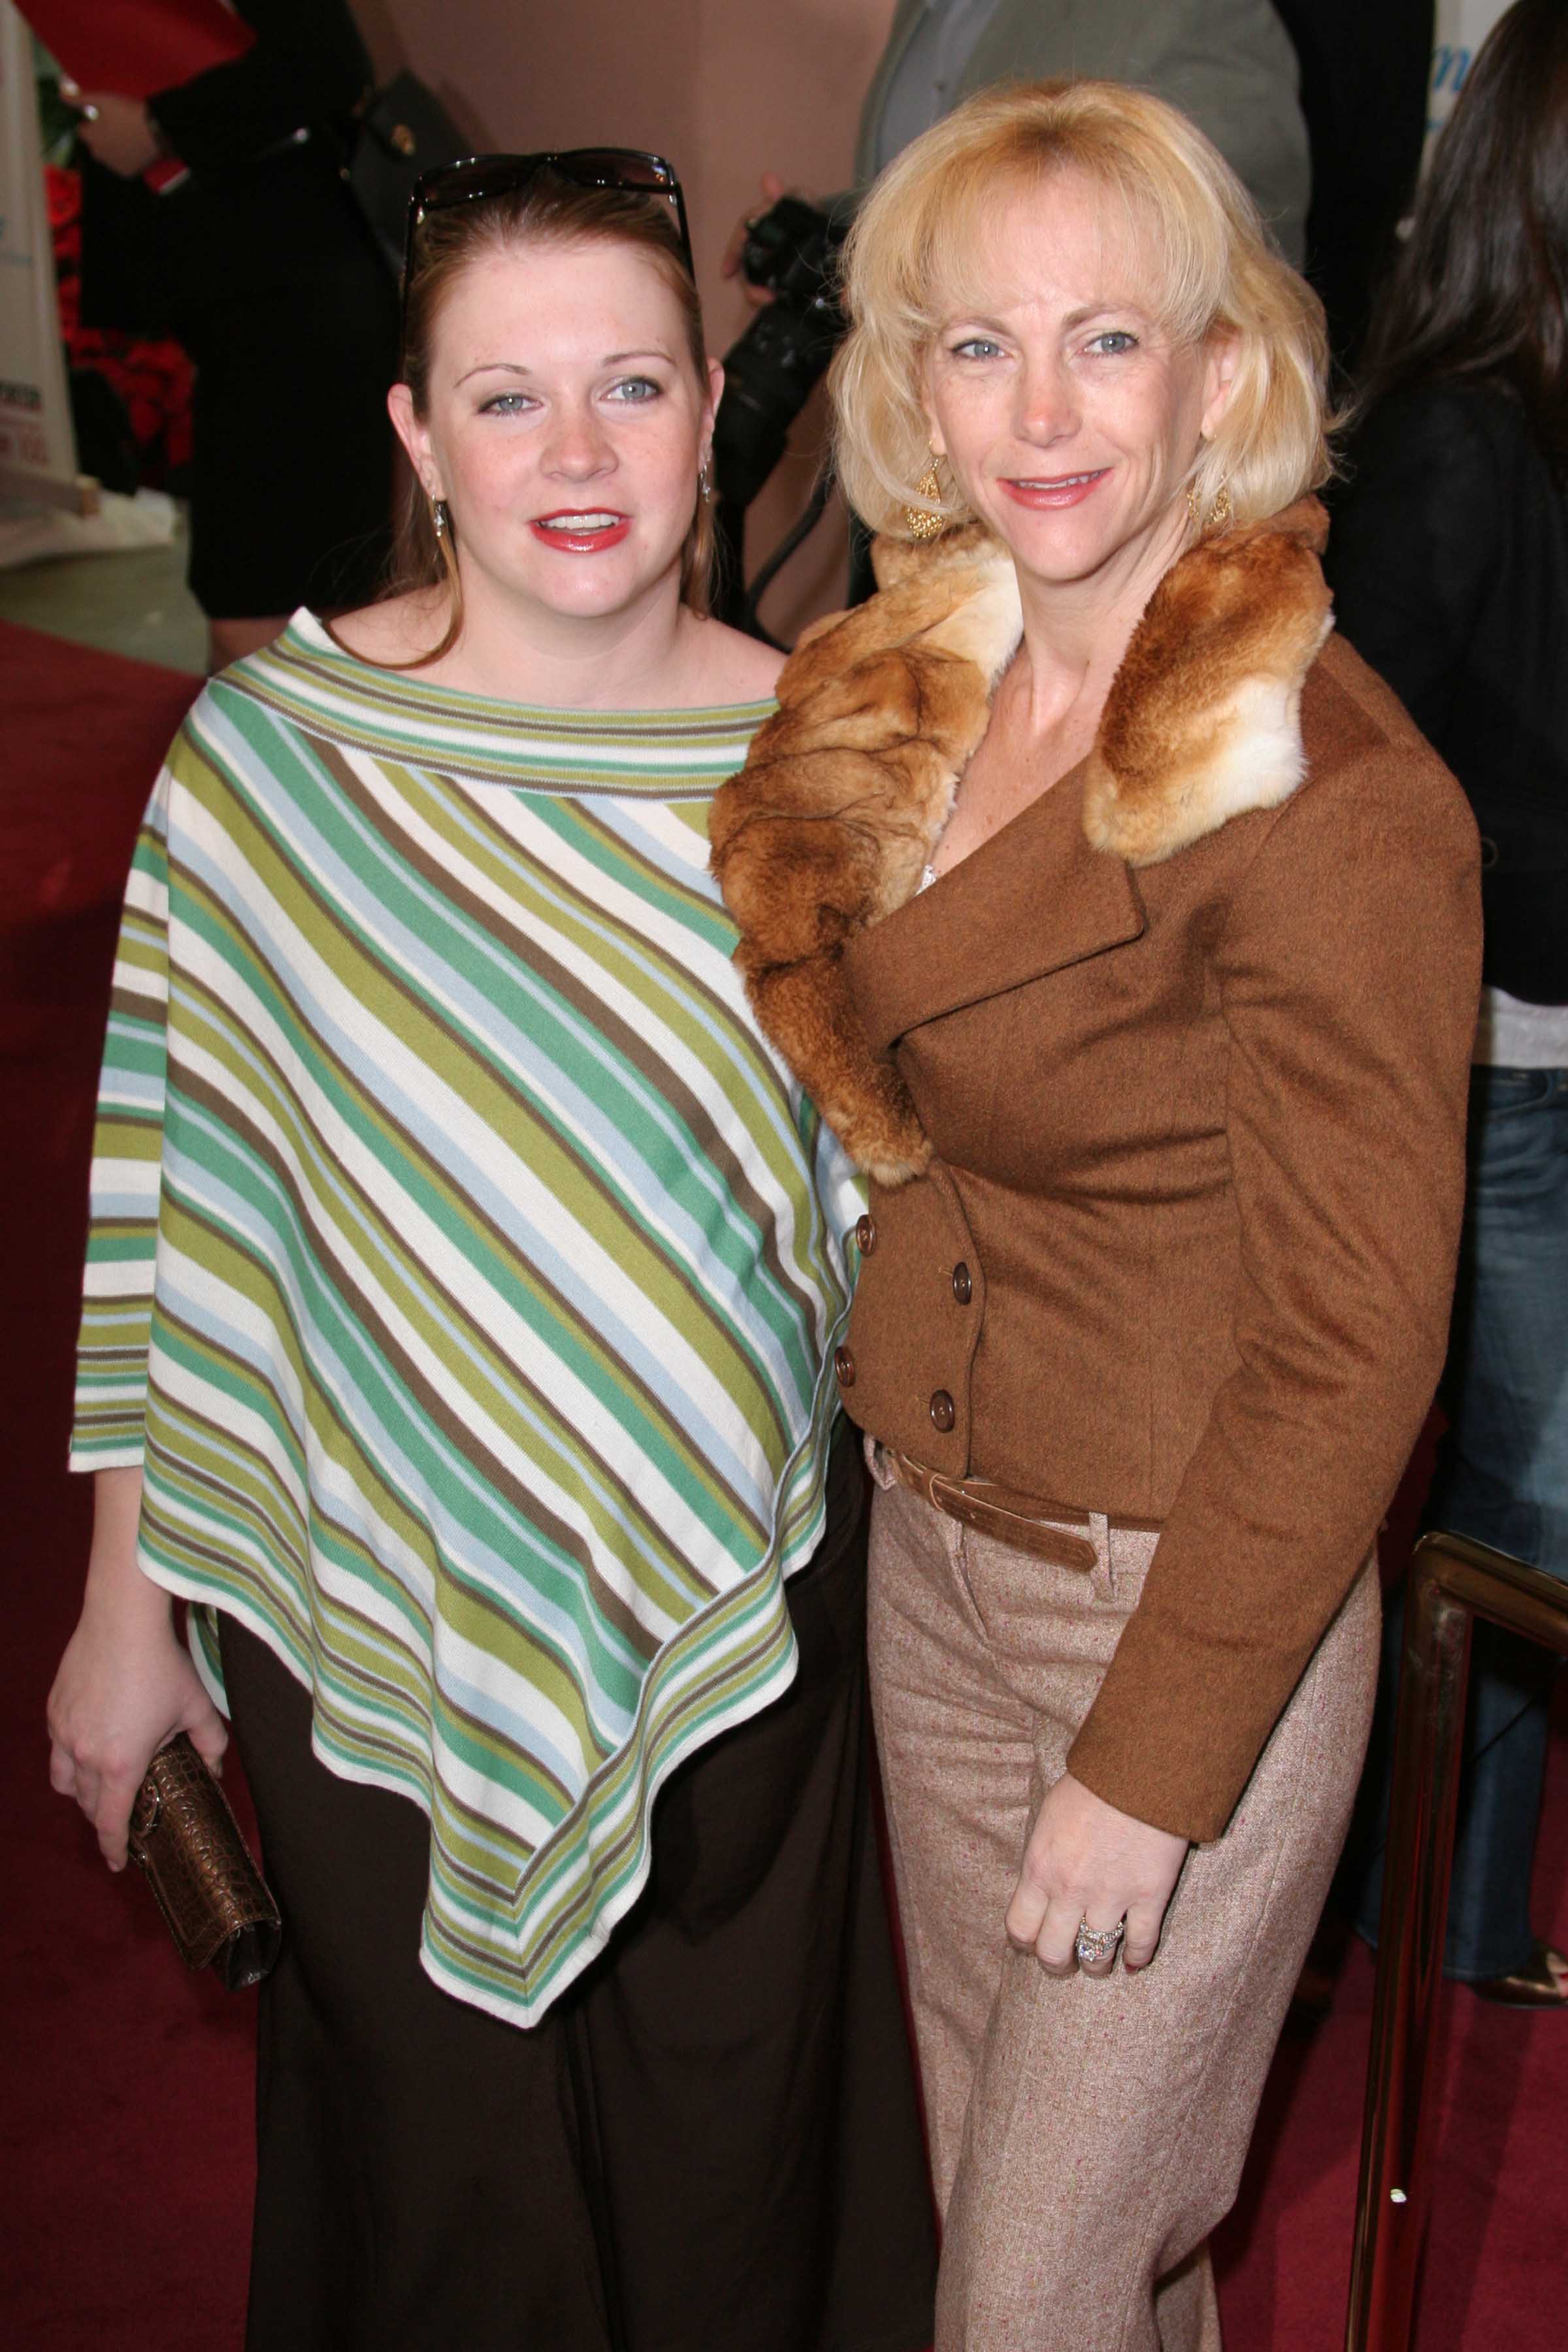 Melissa Joan Hart and Paula Hart at The Hollywood Reporter's Women In Entertainment Power 100 Breakfast in Beverly Hills, on December 6, 2005. | Source: Getty Images